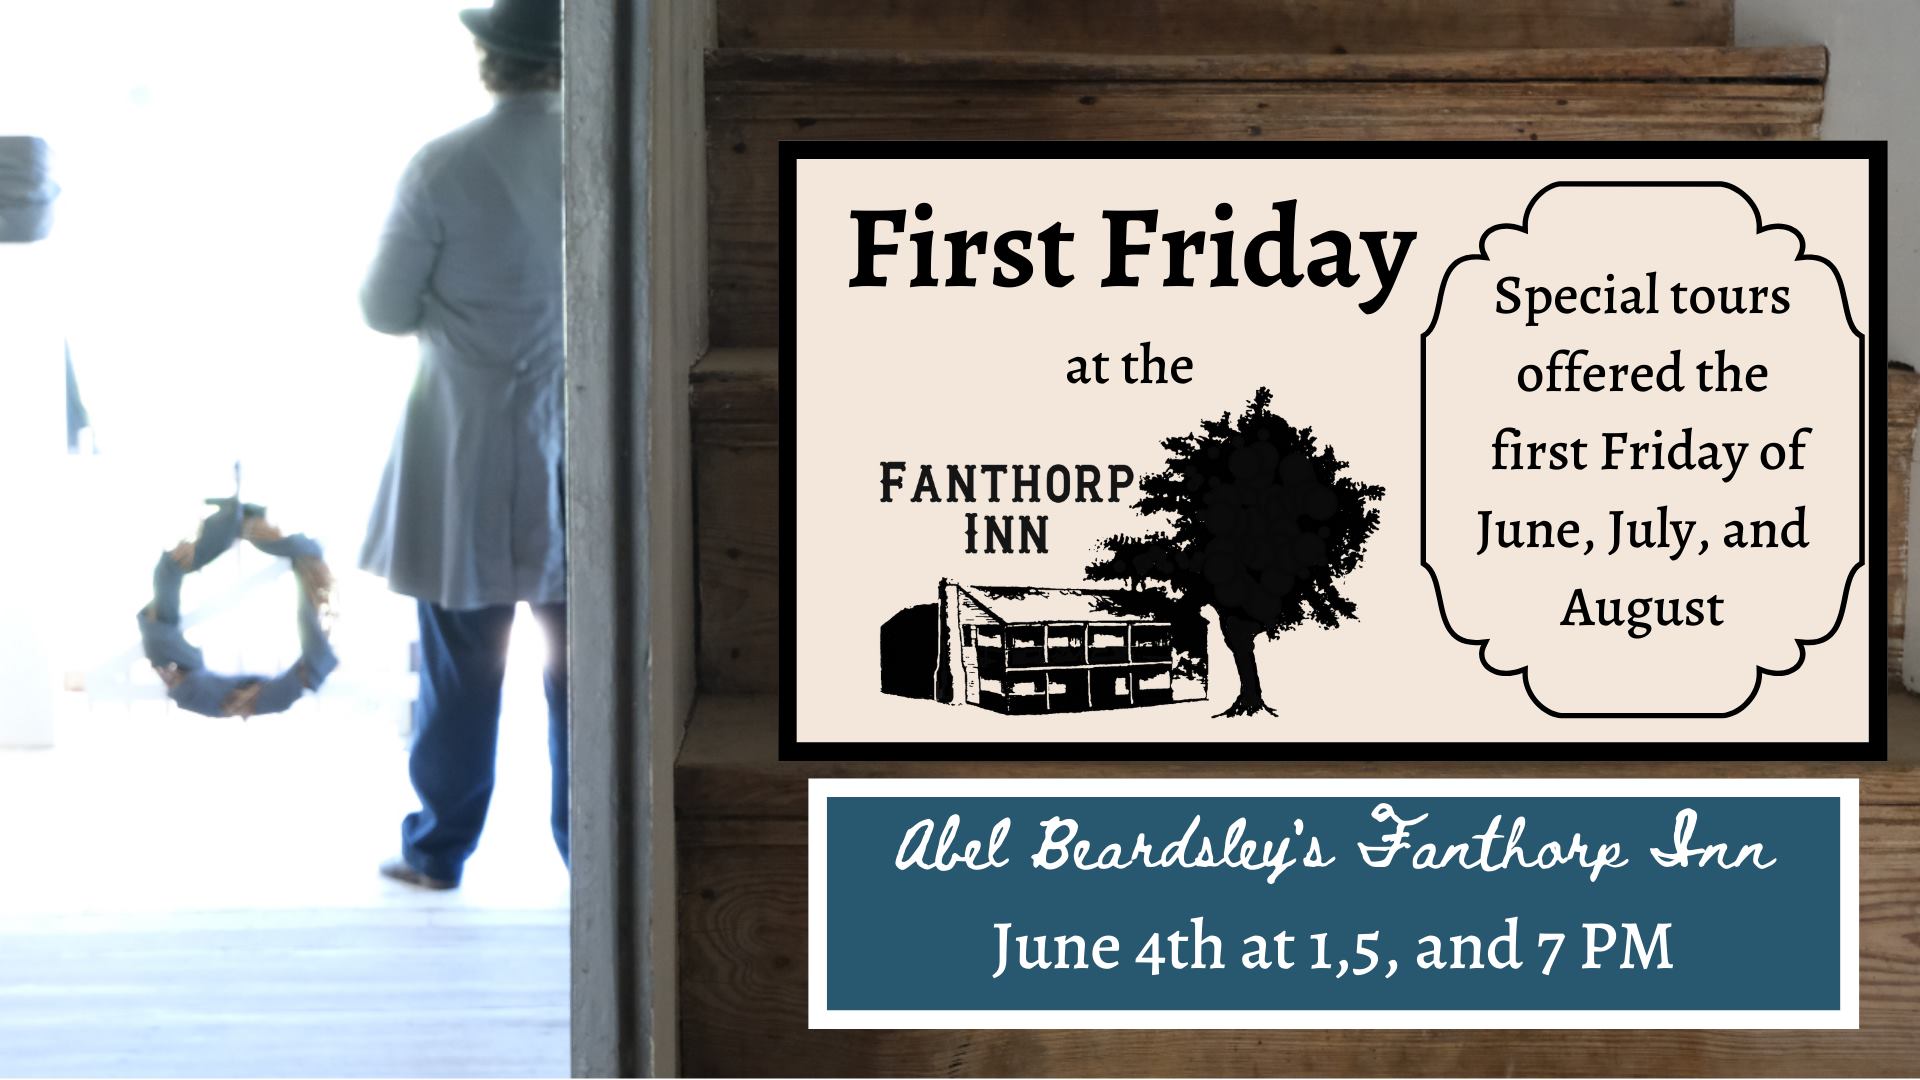 First Friday at Fanthorp Inn